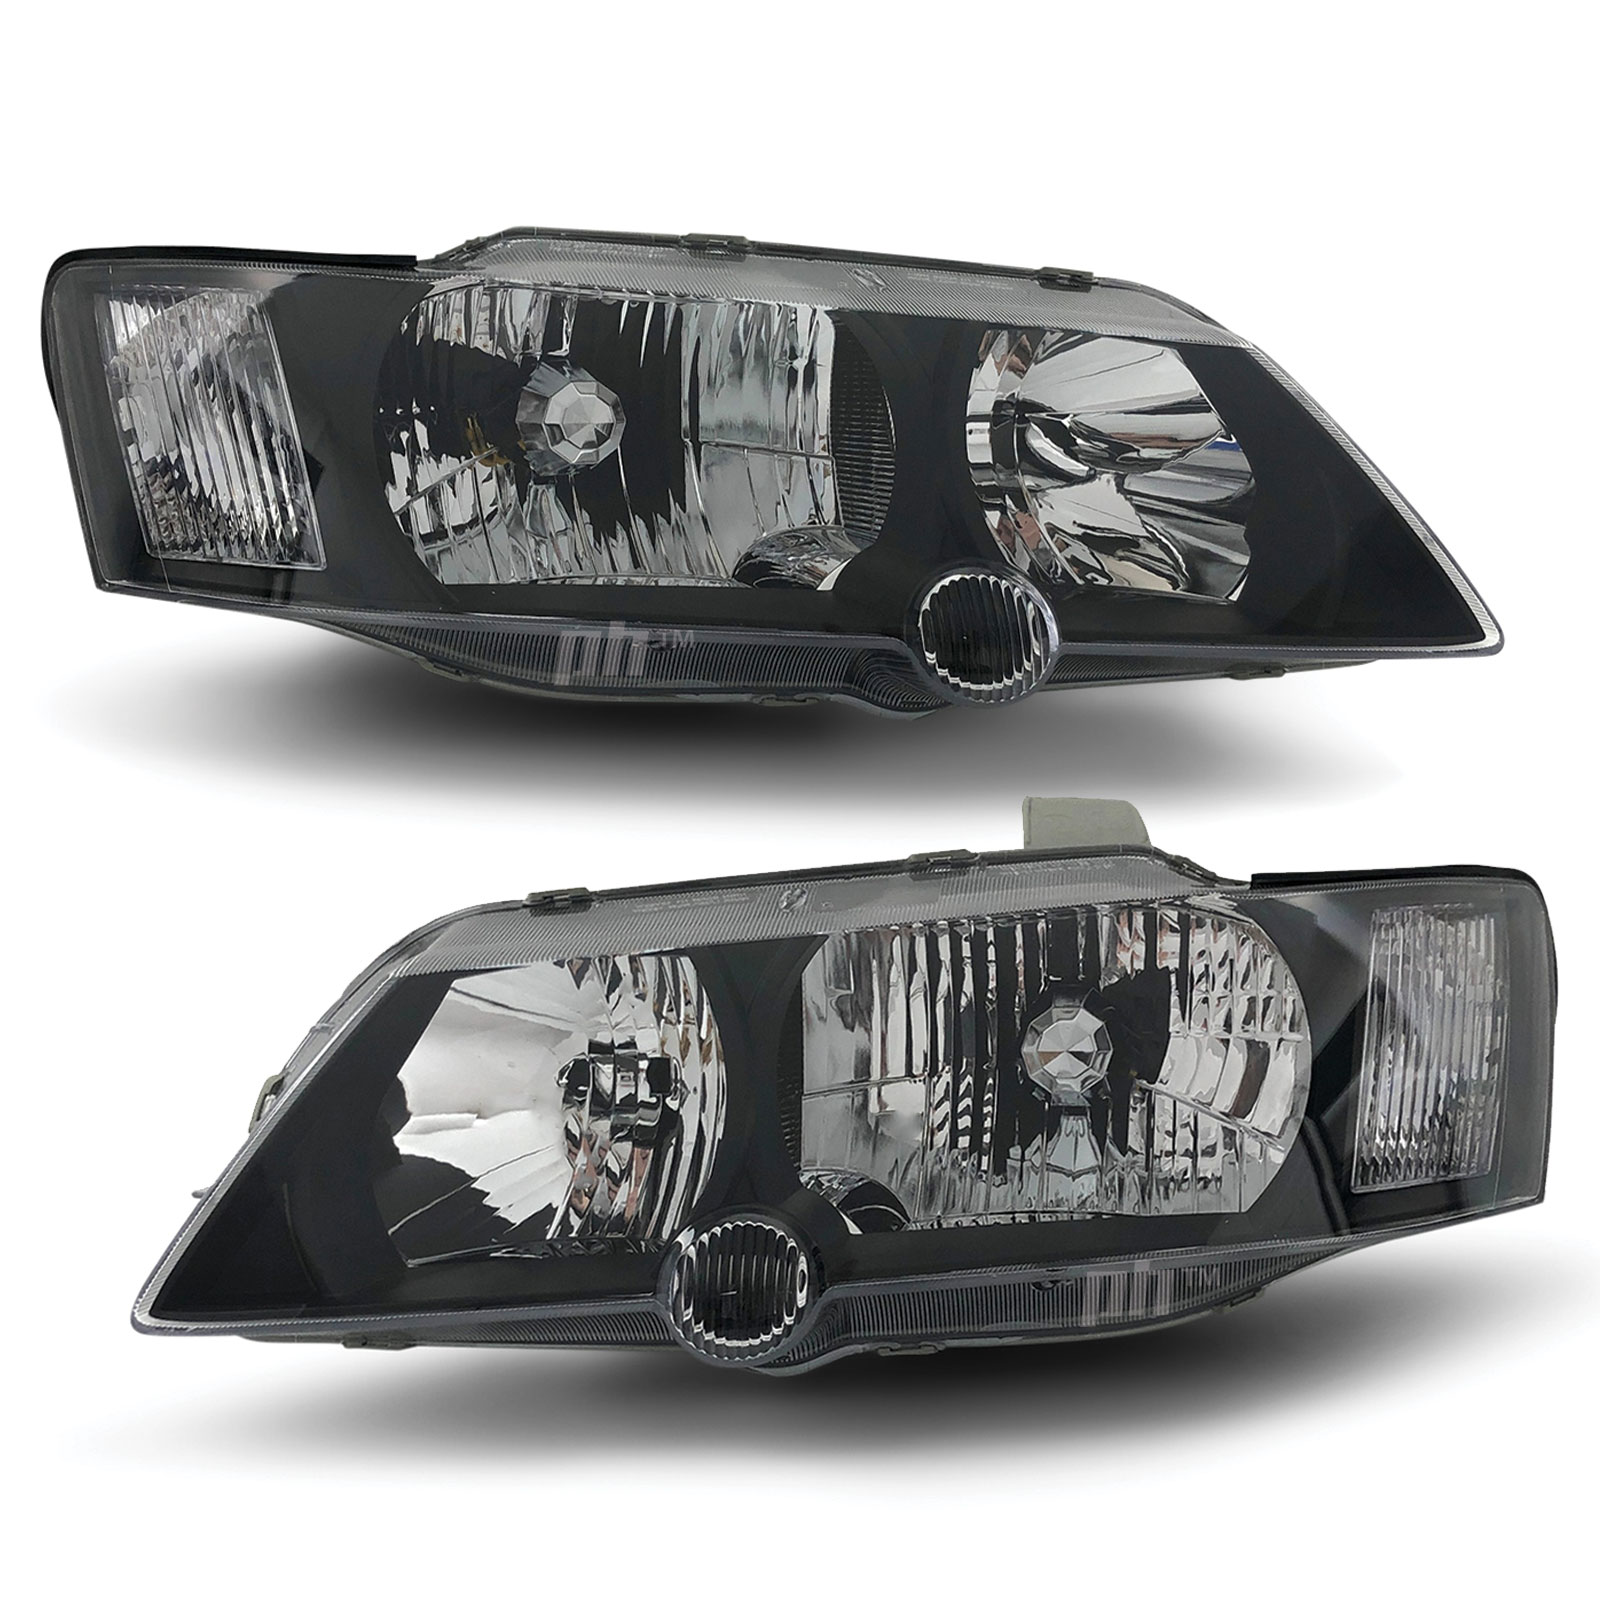 Details about   Pair LH+RH Head Light For Holden Commodore VY SS SV8 To Fit Exe Acclaim Equipe